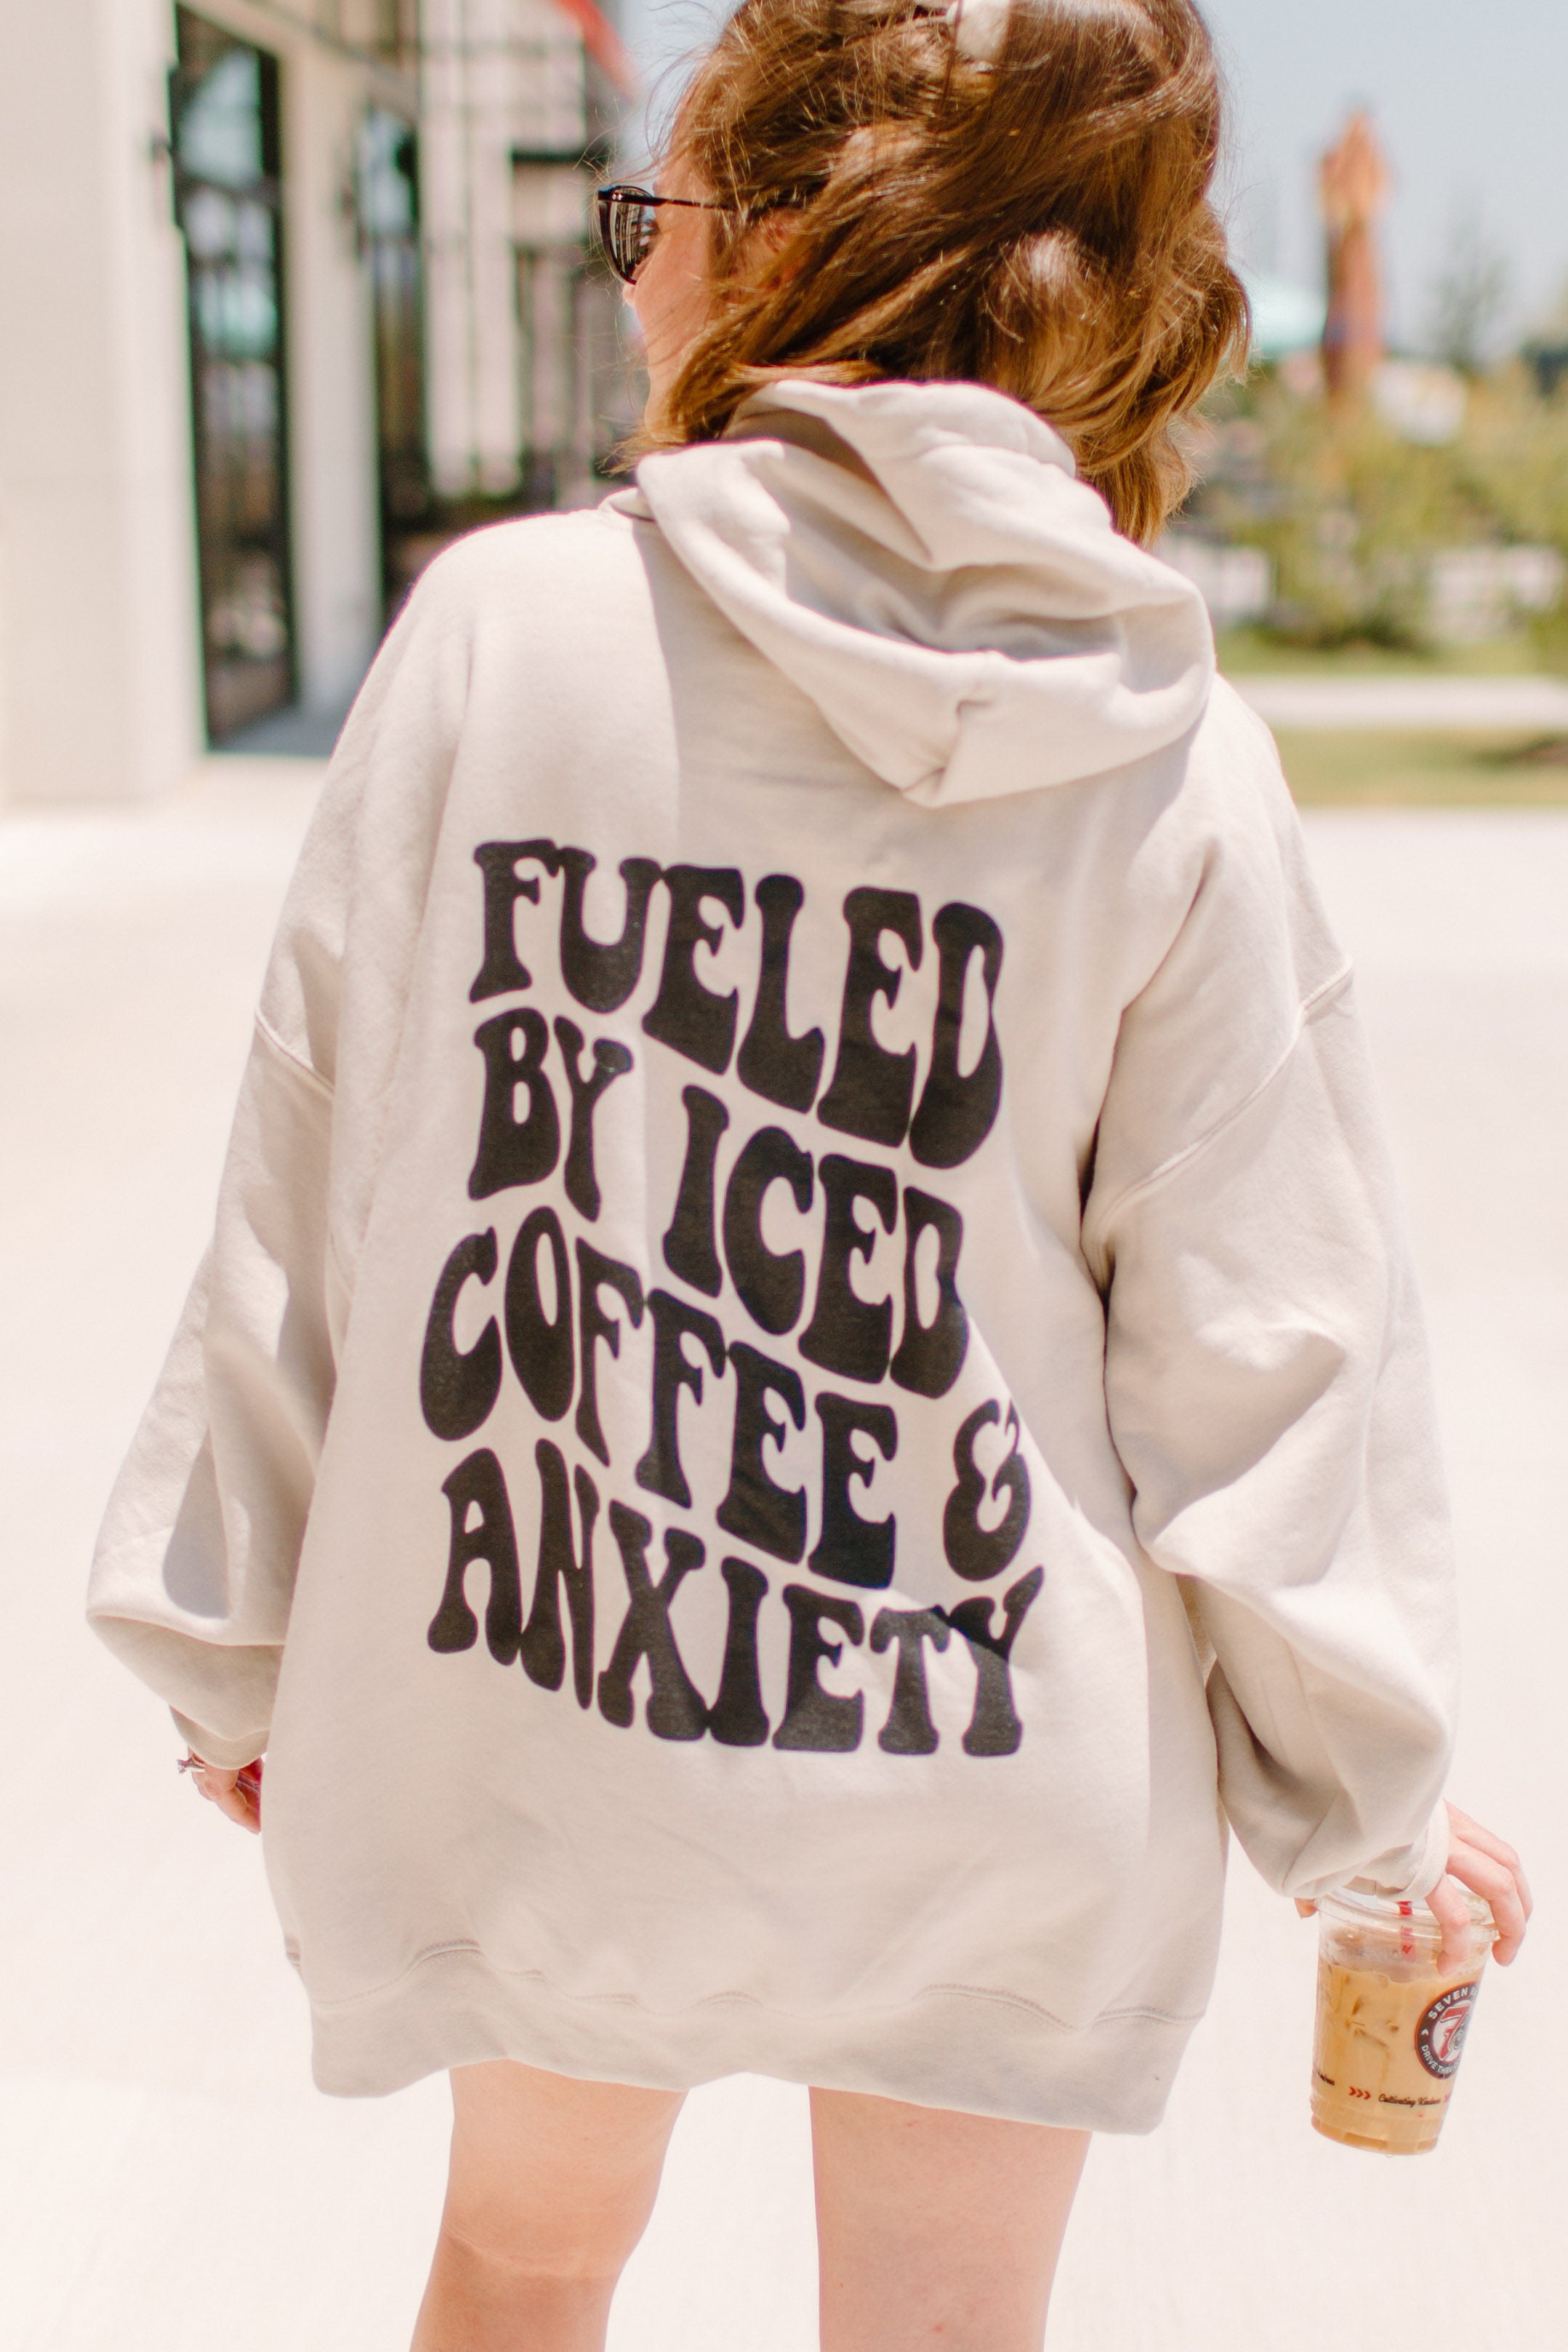 Fueled by iced coffee and anxiety